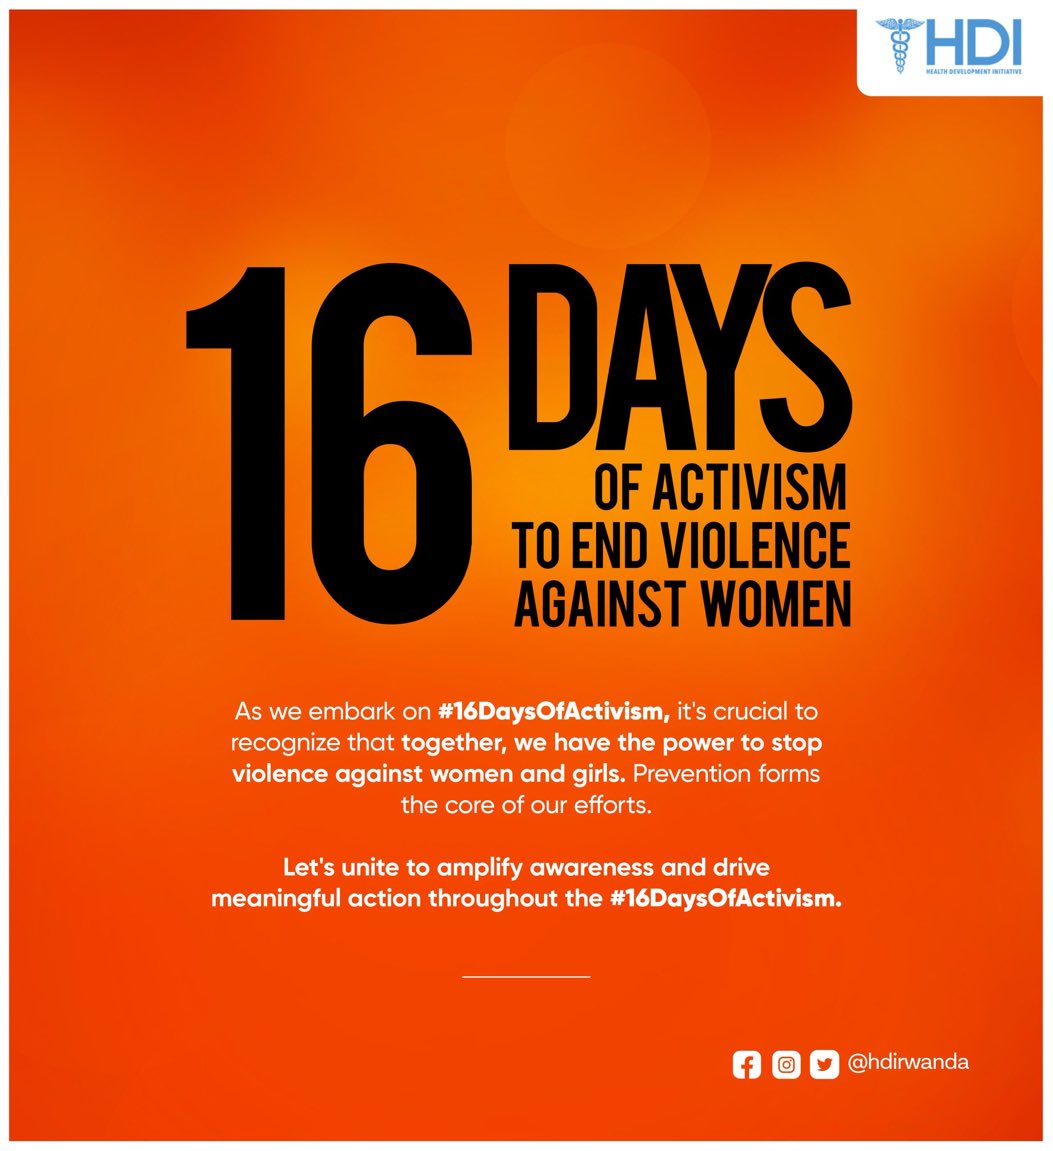 Let’s unite to amplify awareness and drive meaningful action to stop violence against women and girls 
#StopGBV 
#16DaysOfActivismAgainstGBV 
#HinduraImyumvire
#DuhindureImyumvire